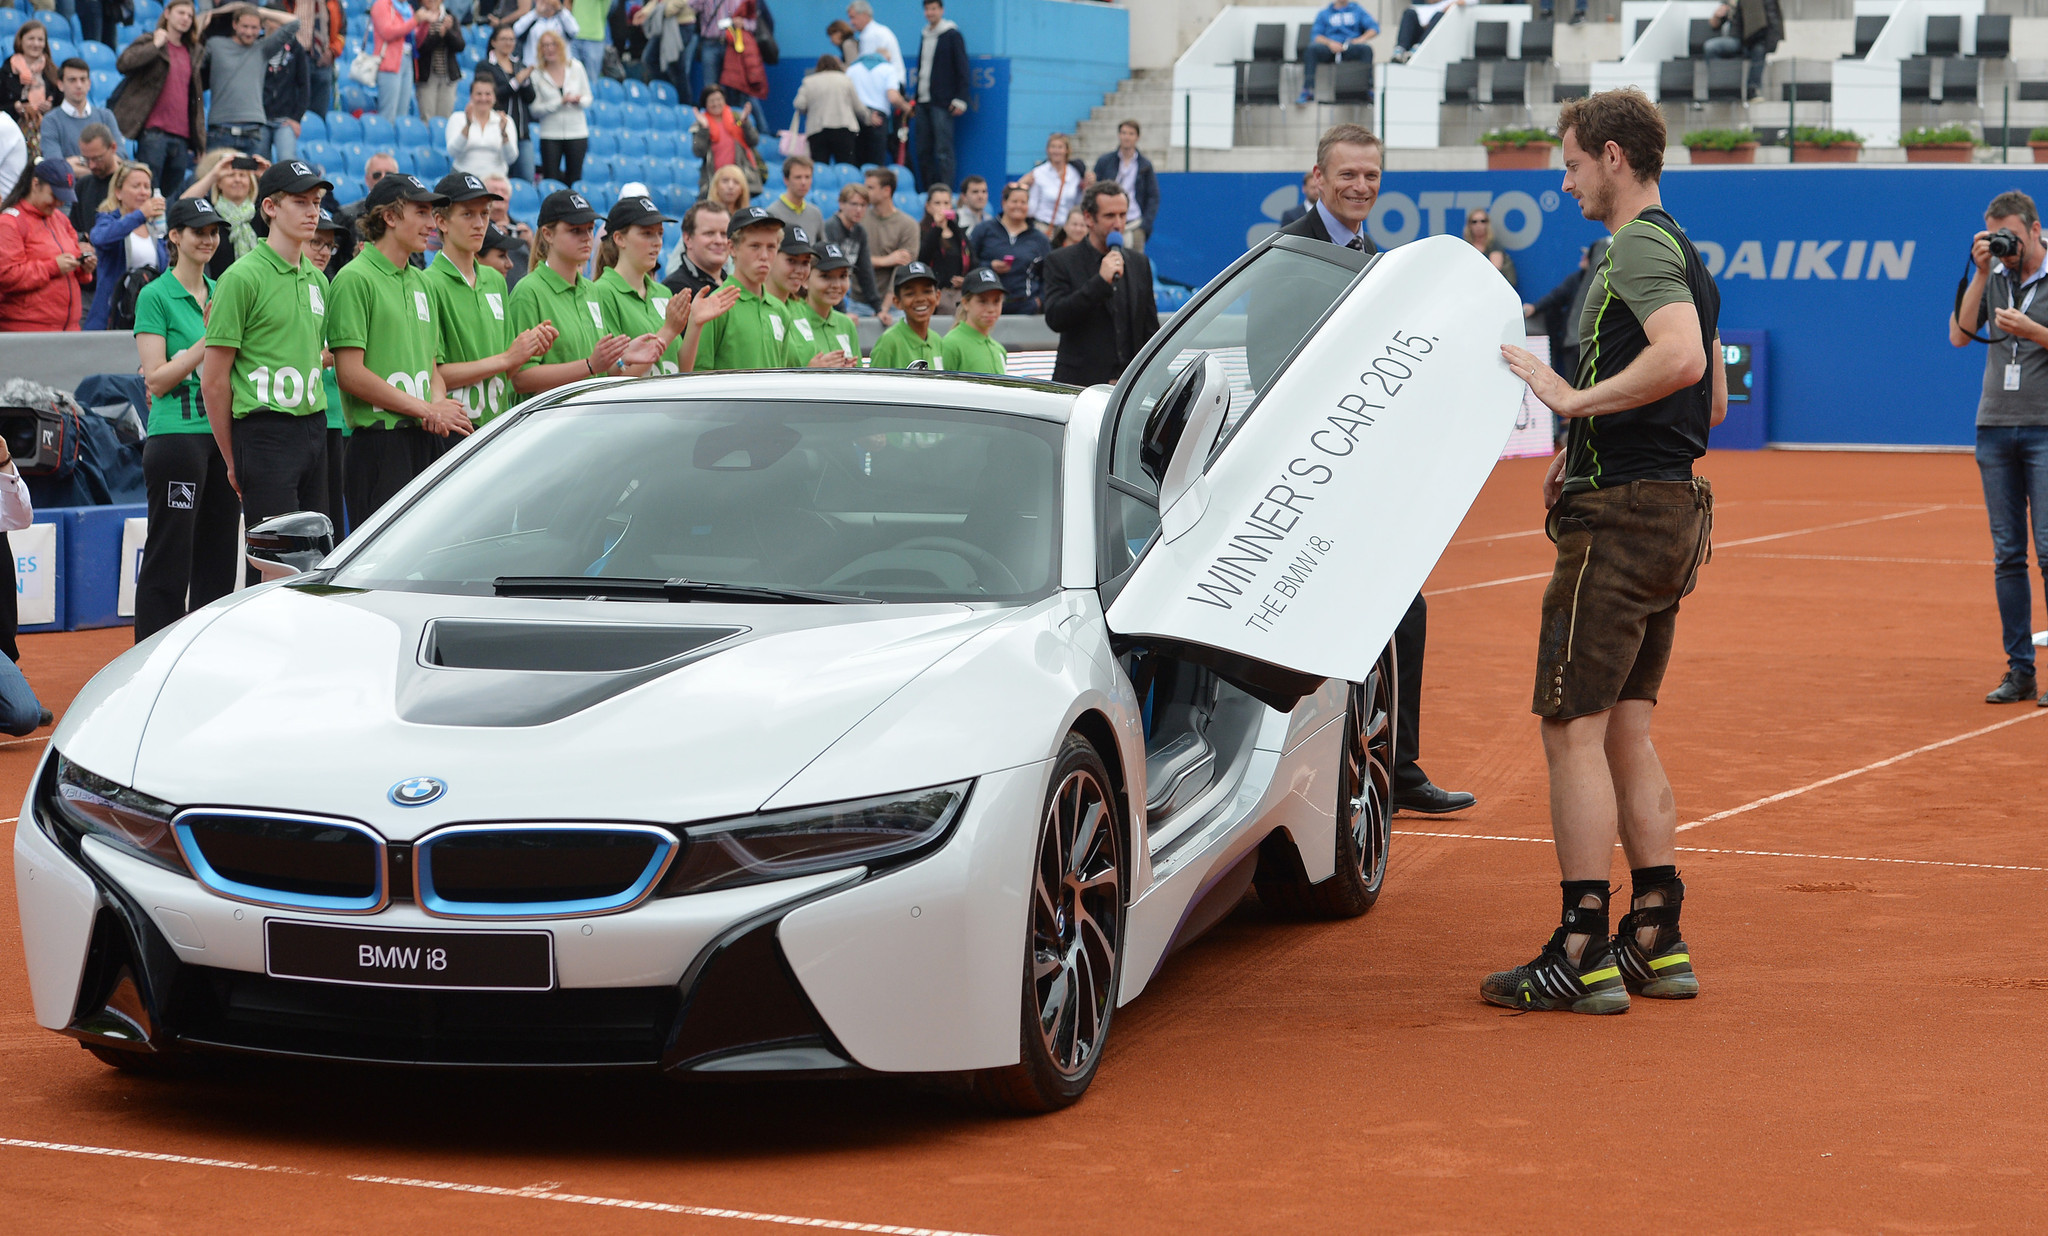 Andy Murray wins rain-delayed BMW Open and new car - LA Times2048 x 1236